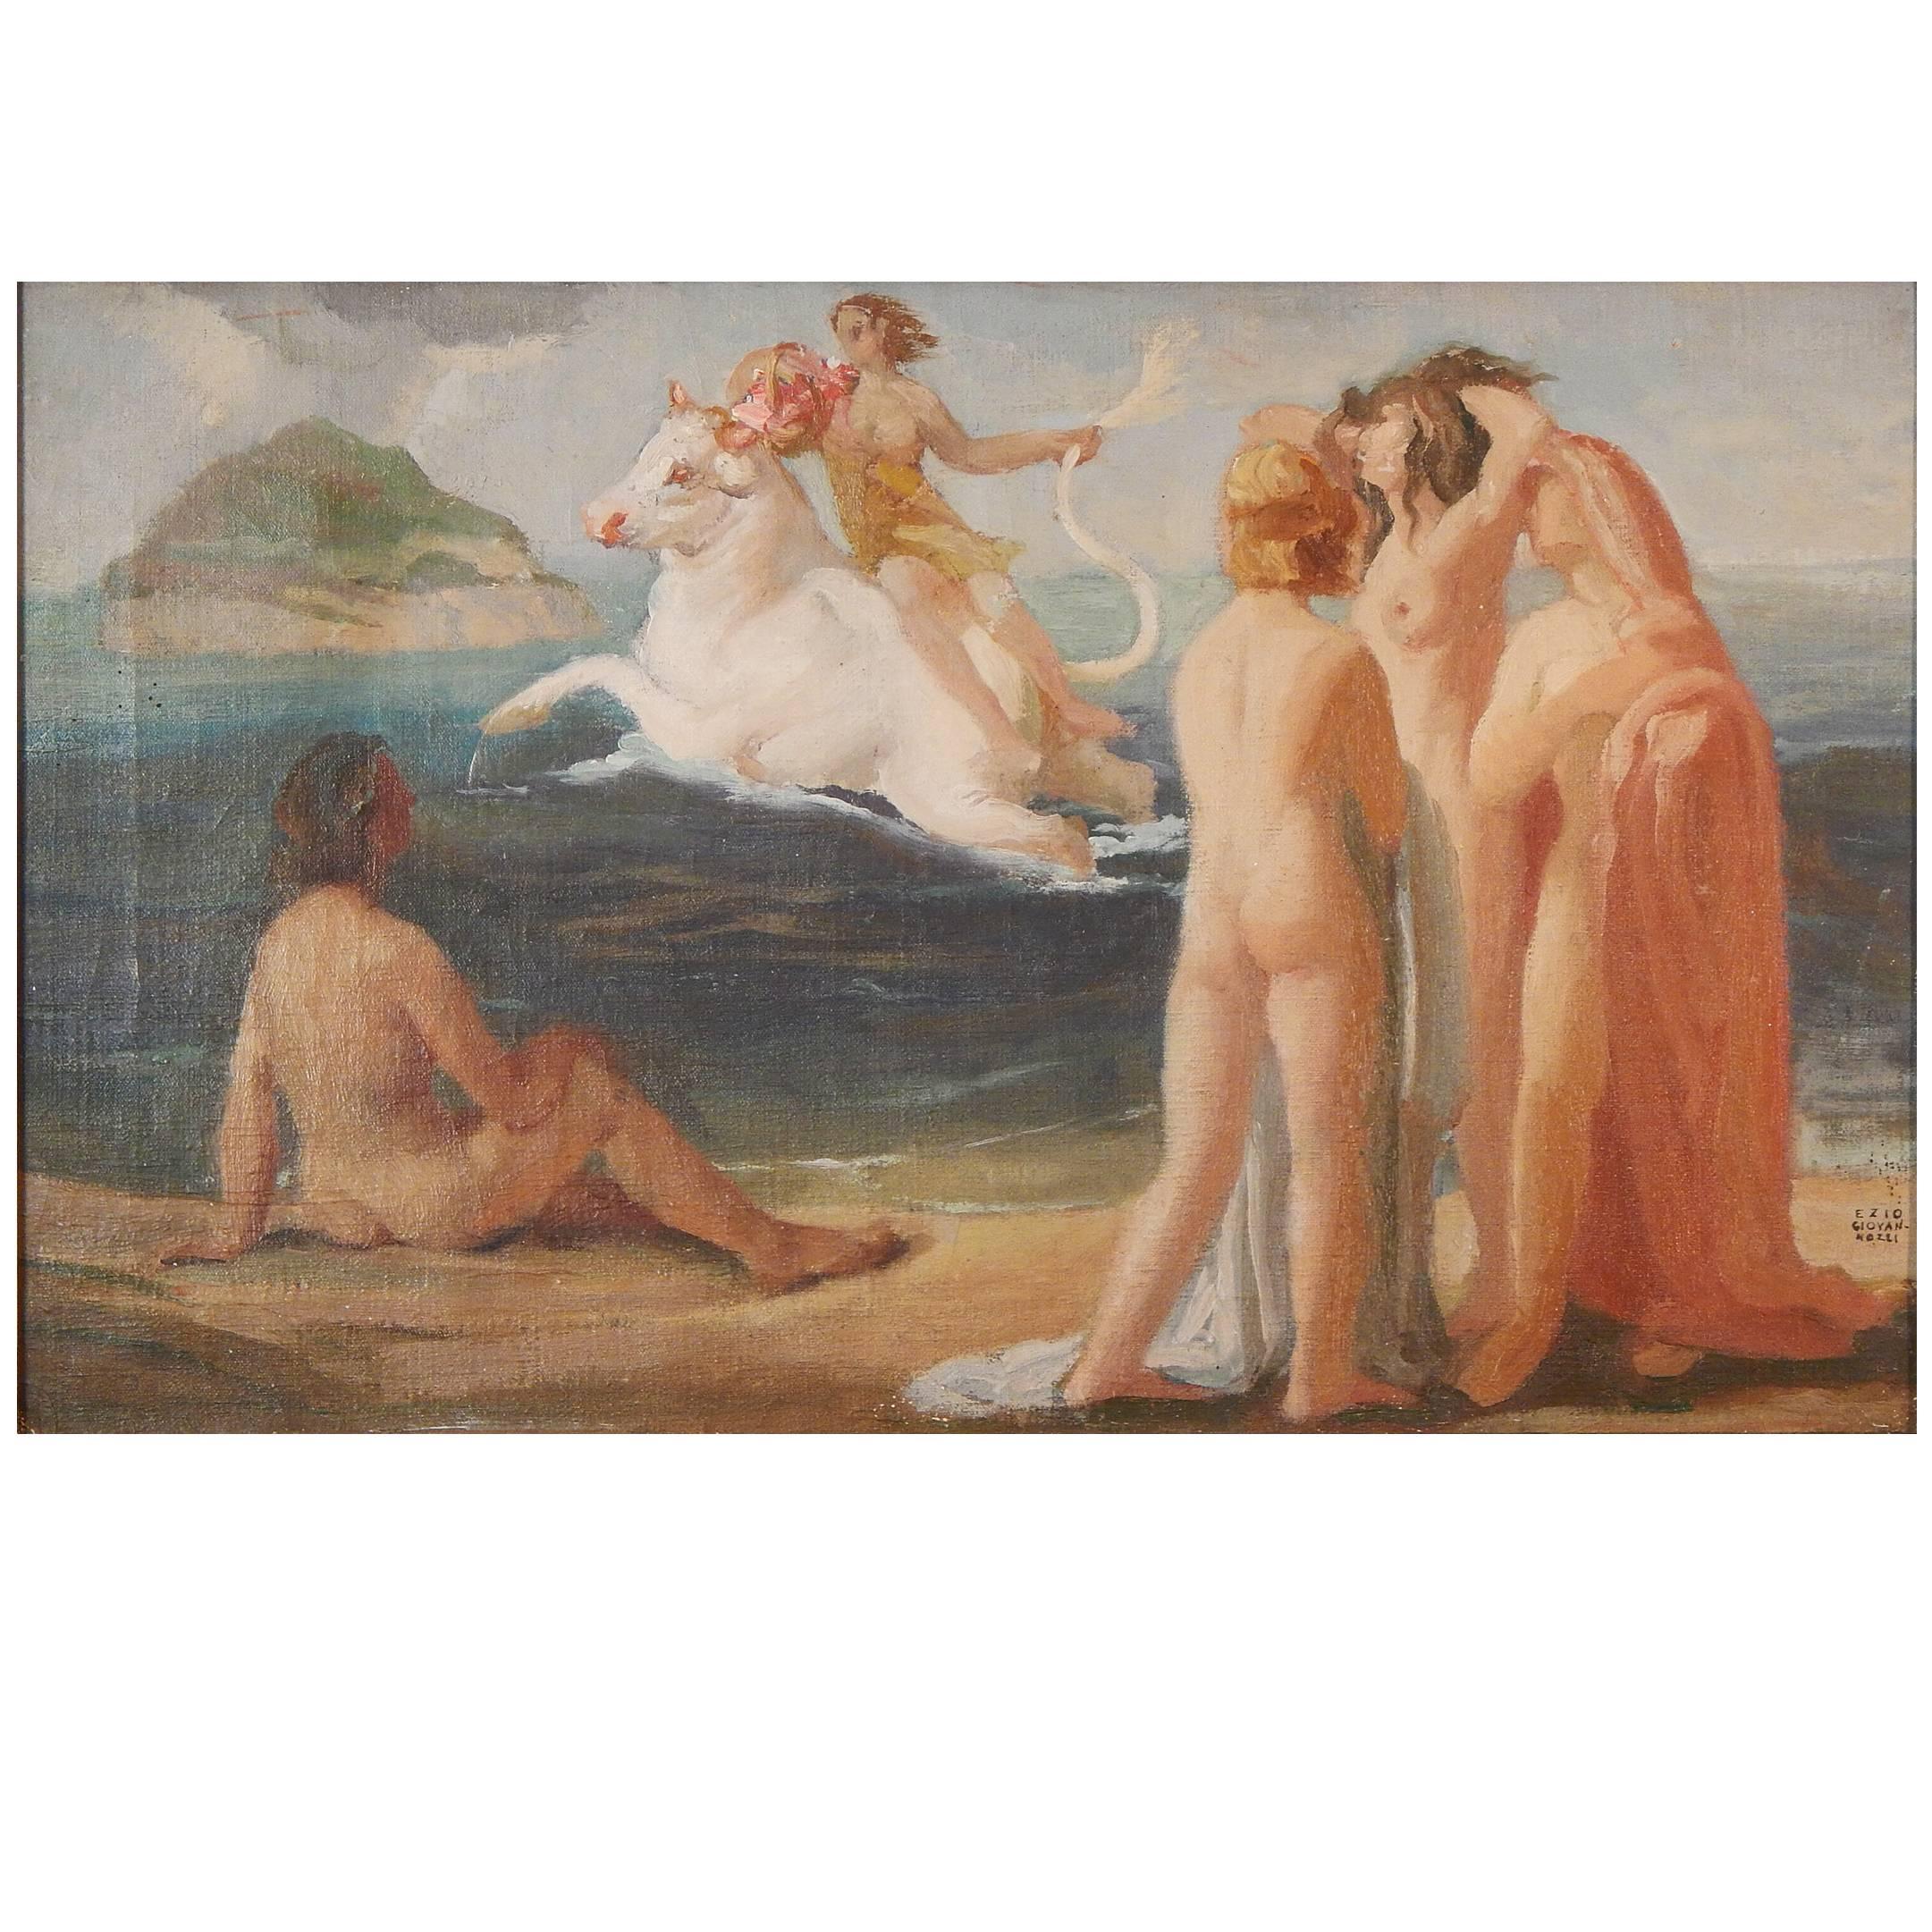 "Europa Spirited off to Crete, " Important Art Deco Mural Study by Giovannozzi For Sale